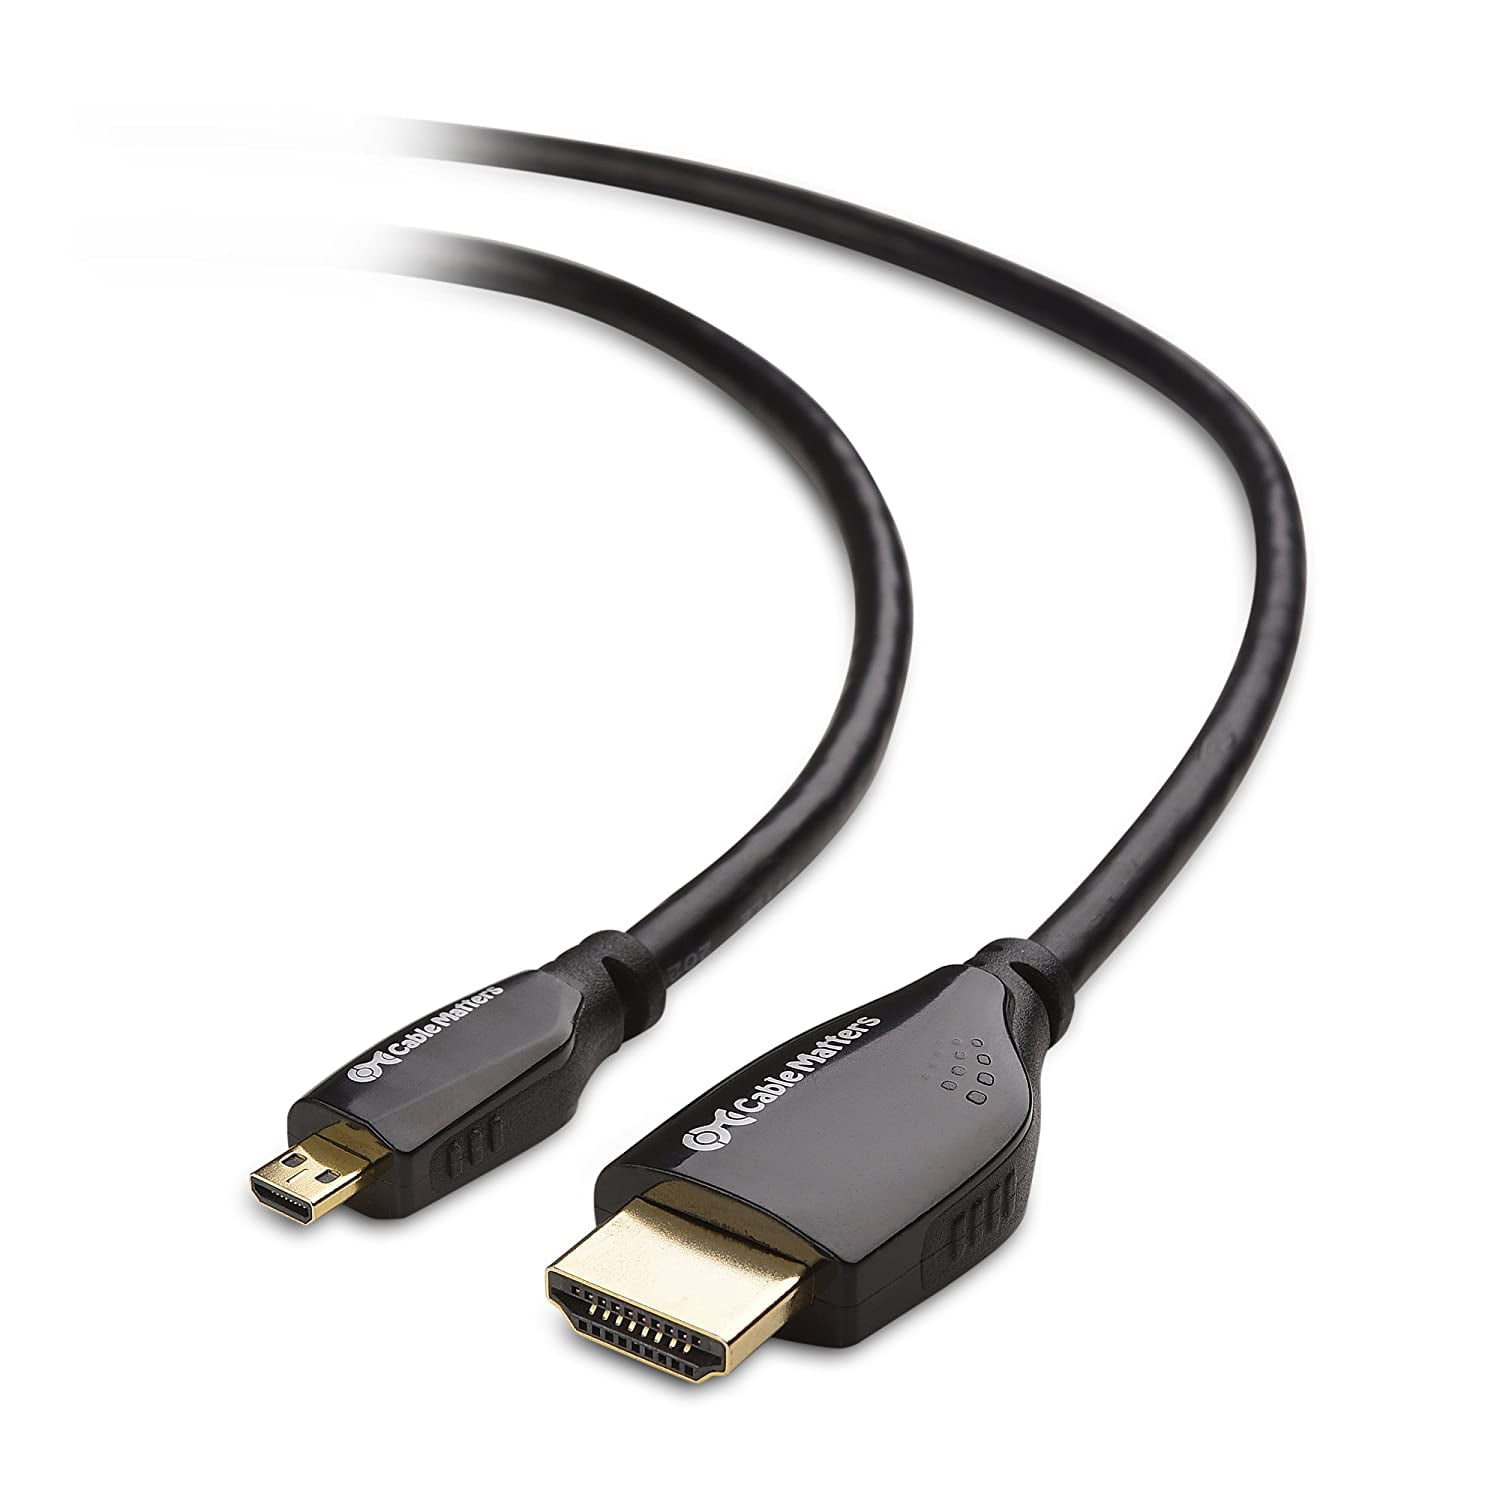 Cable Hdmi 15 Metros Full Hd Compatible Pc/Laptop/Xbox/Playstation/Nintendo